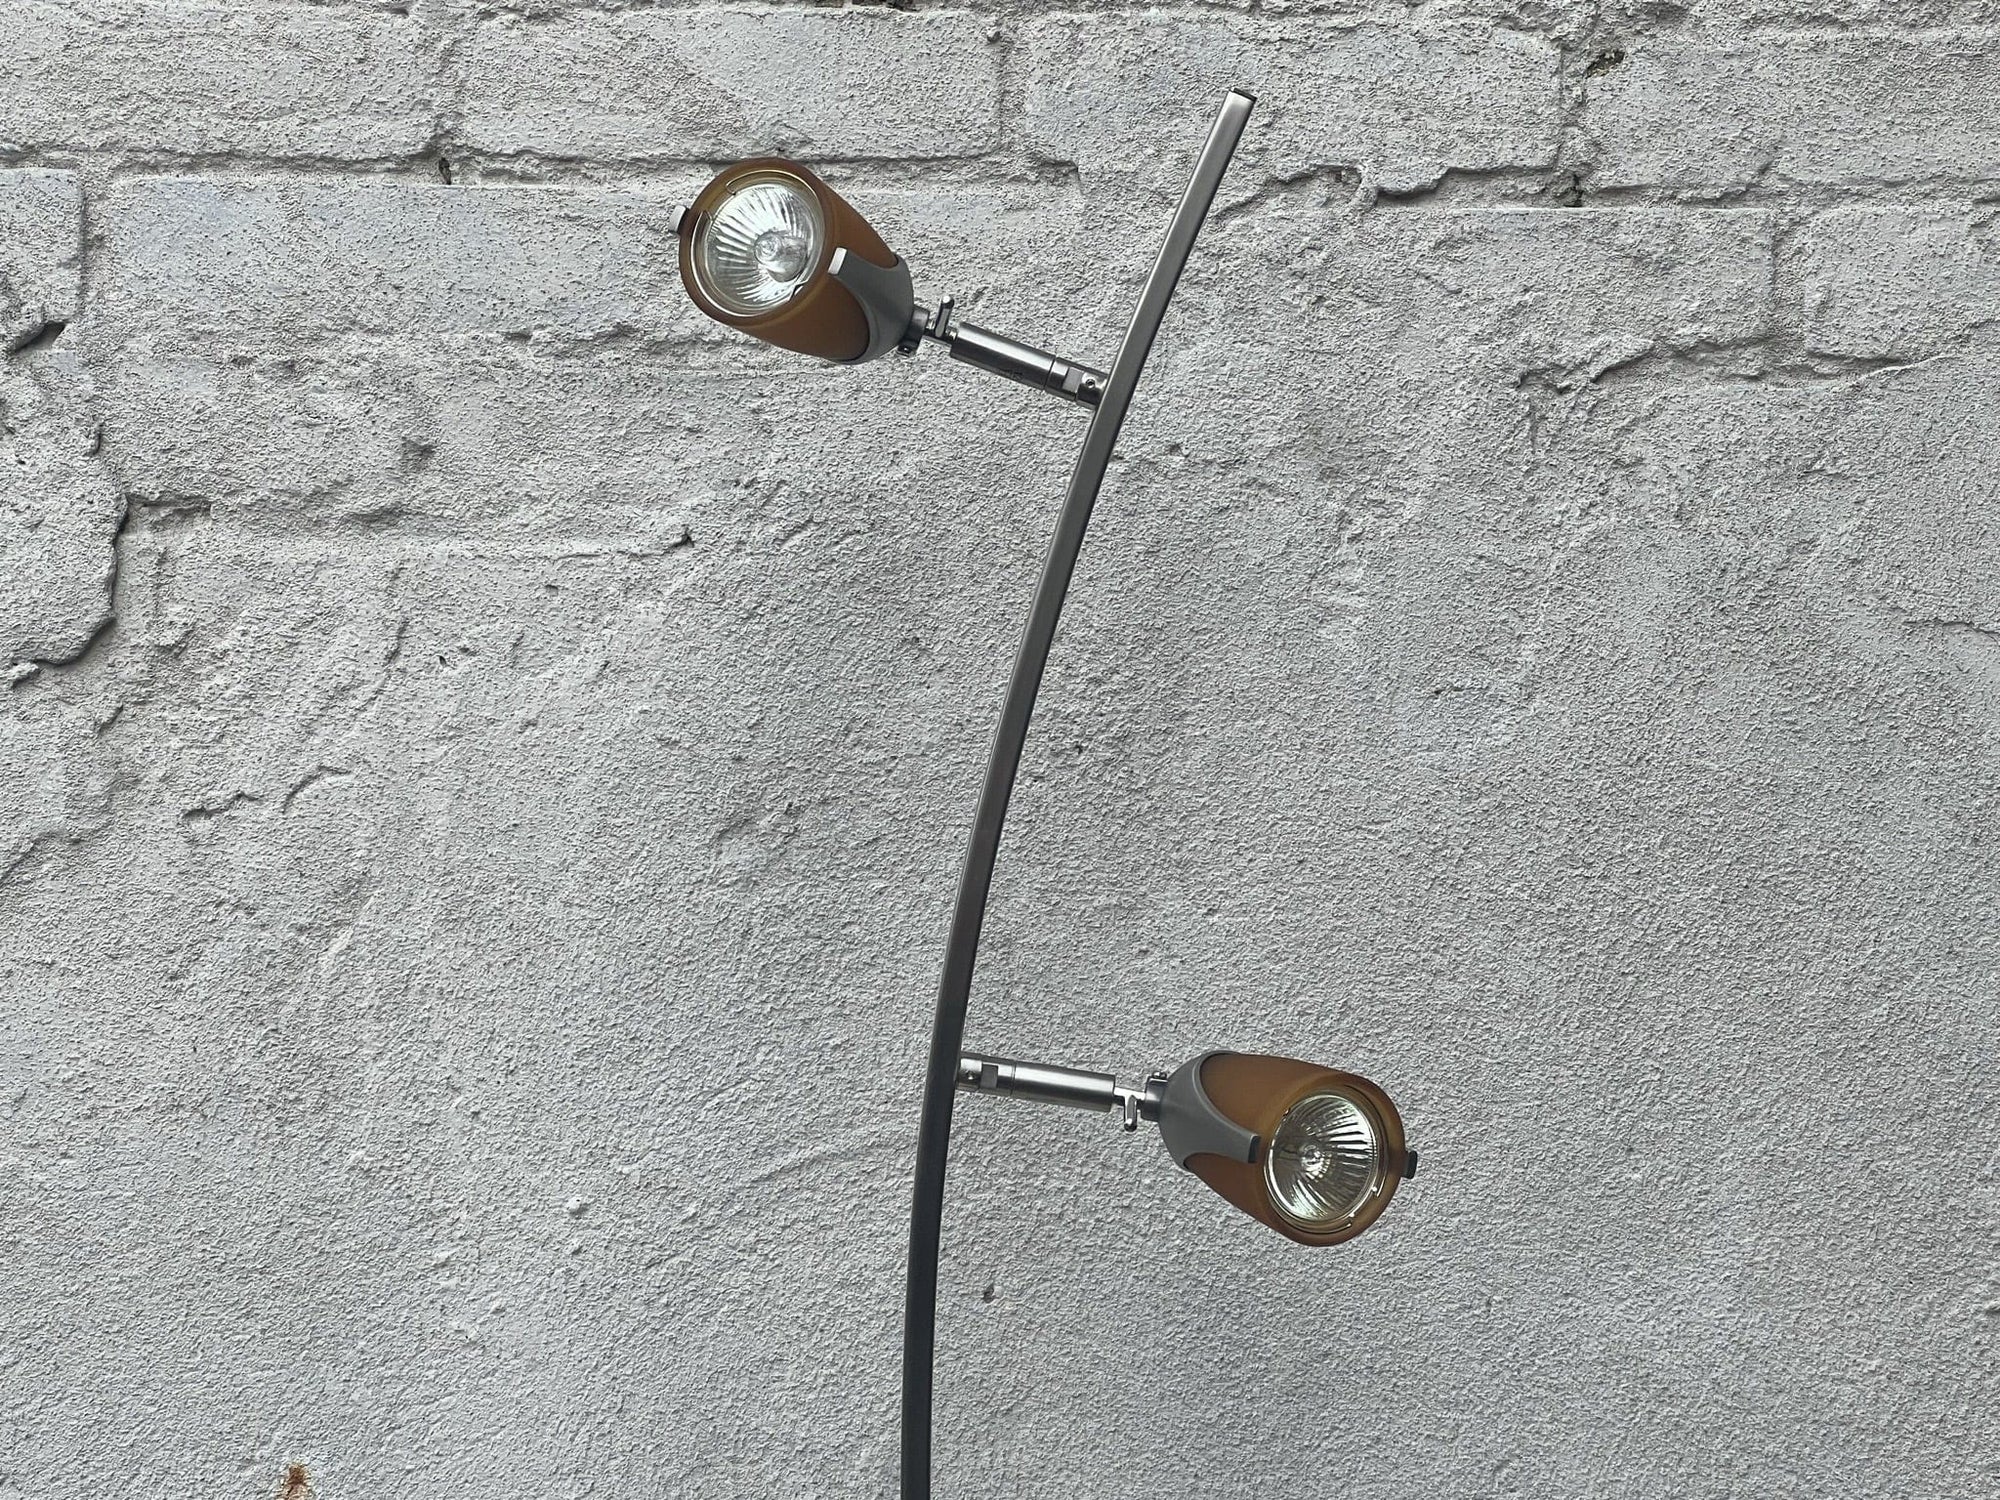 I Like Mike's Mid Century Modern lighting Slim Modern Vintage Tulip Floor Lamp, 1990's, Two Lights, Compact, New Old Stock, Amber (or Blue) Glass